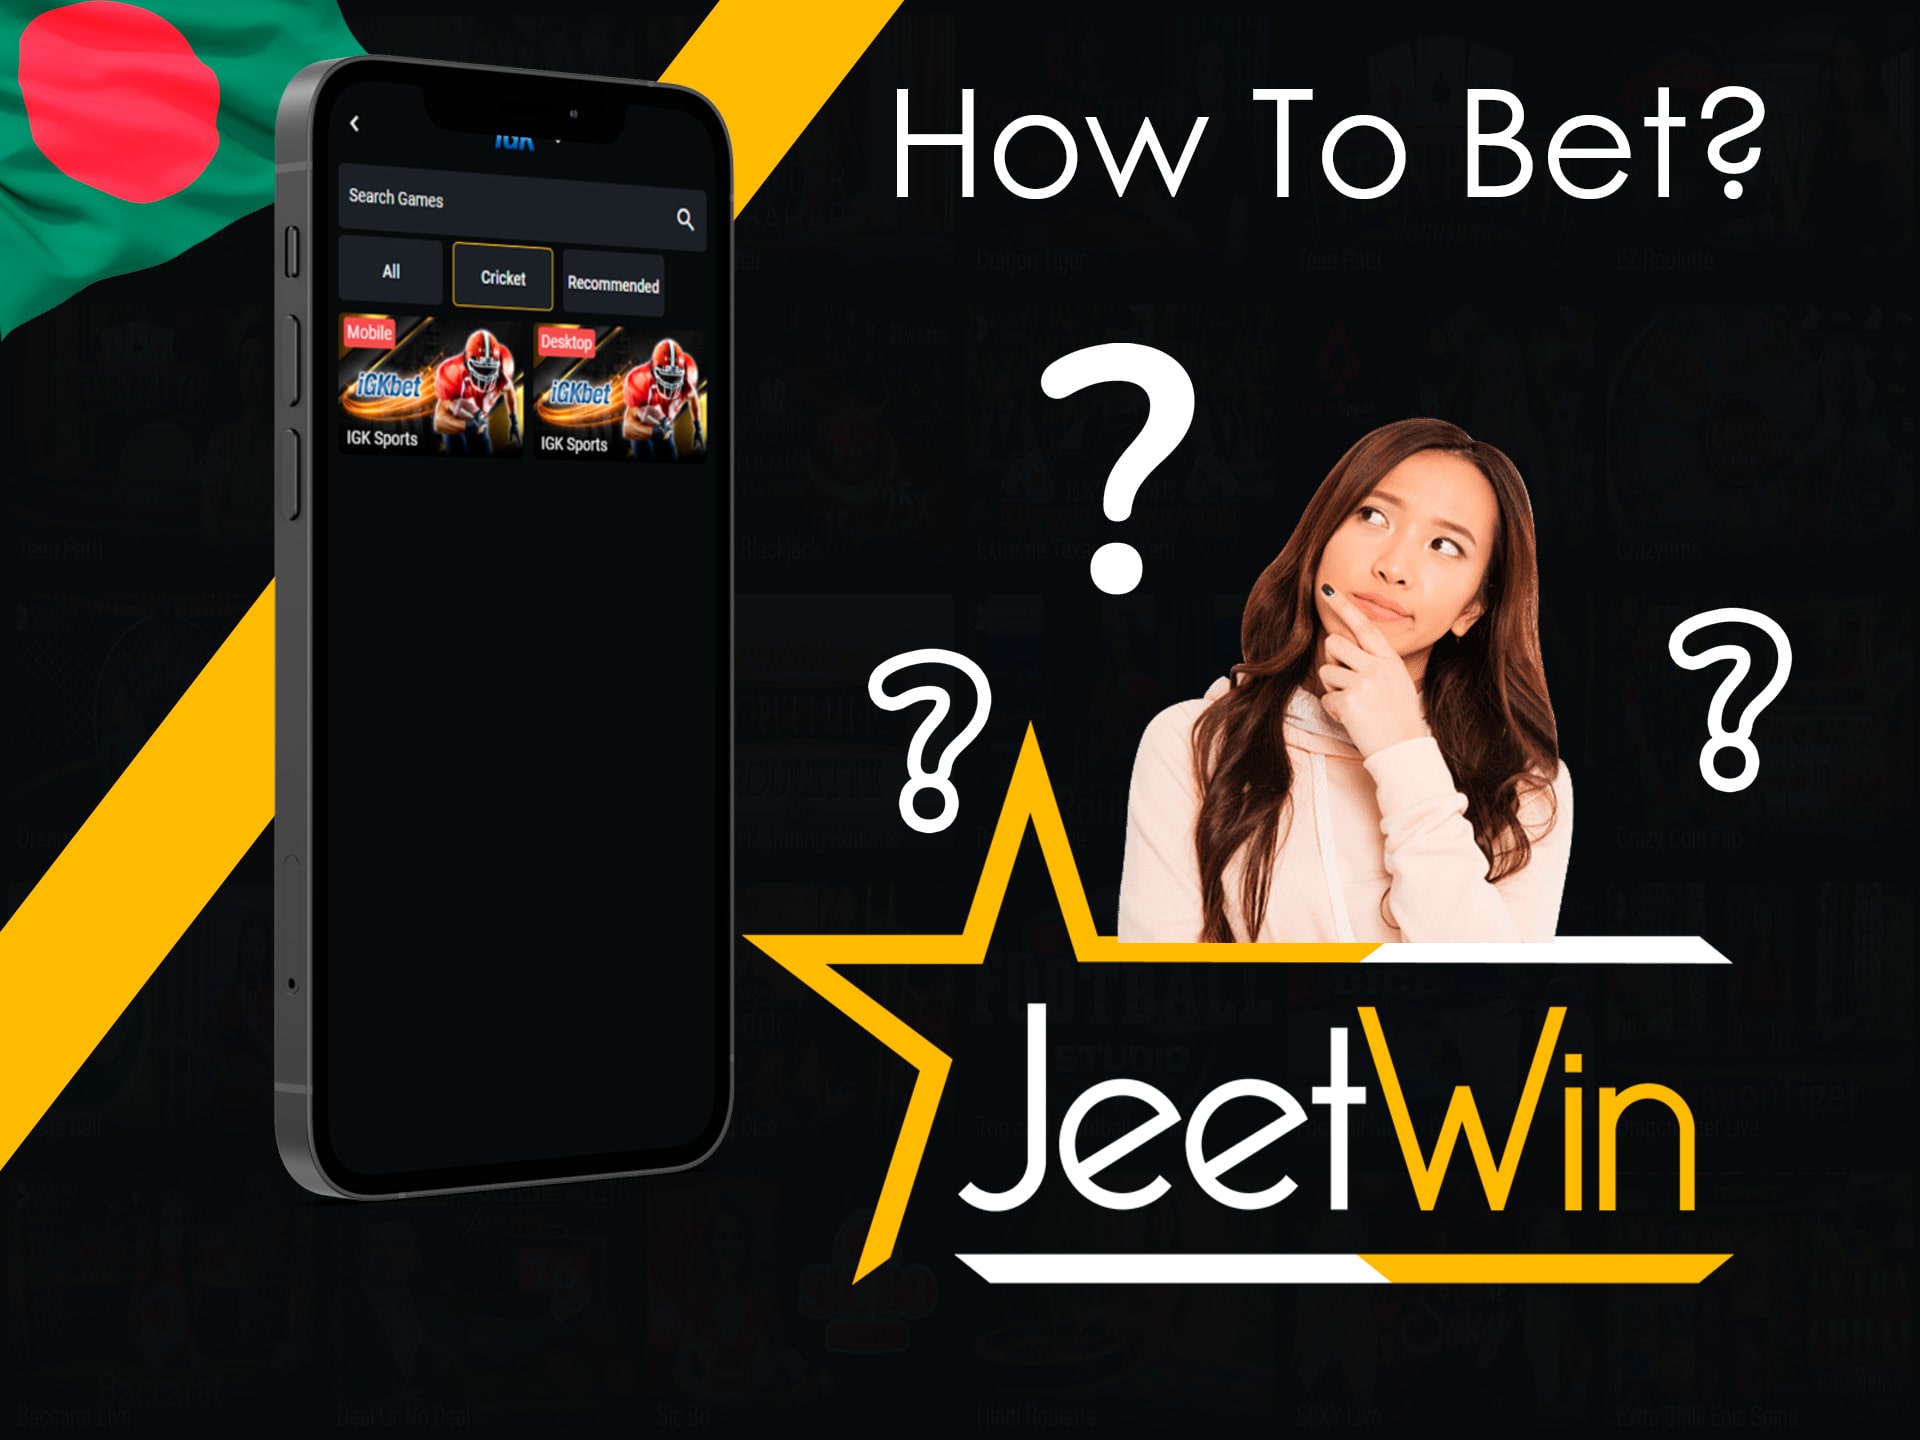 how to bet at jeetwin app